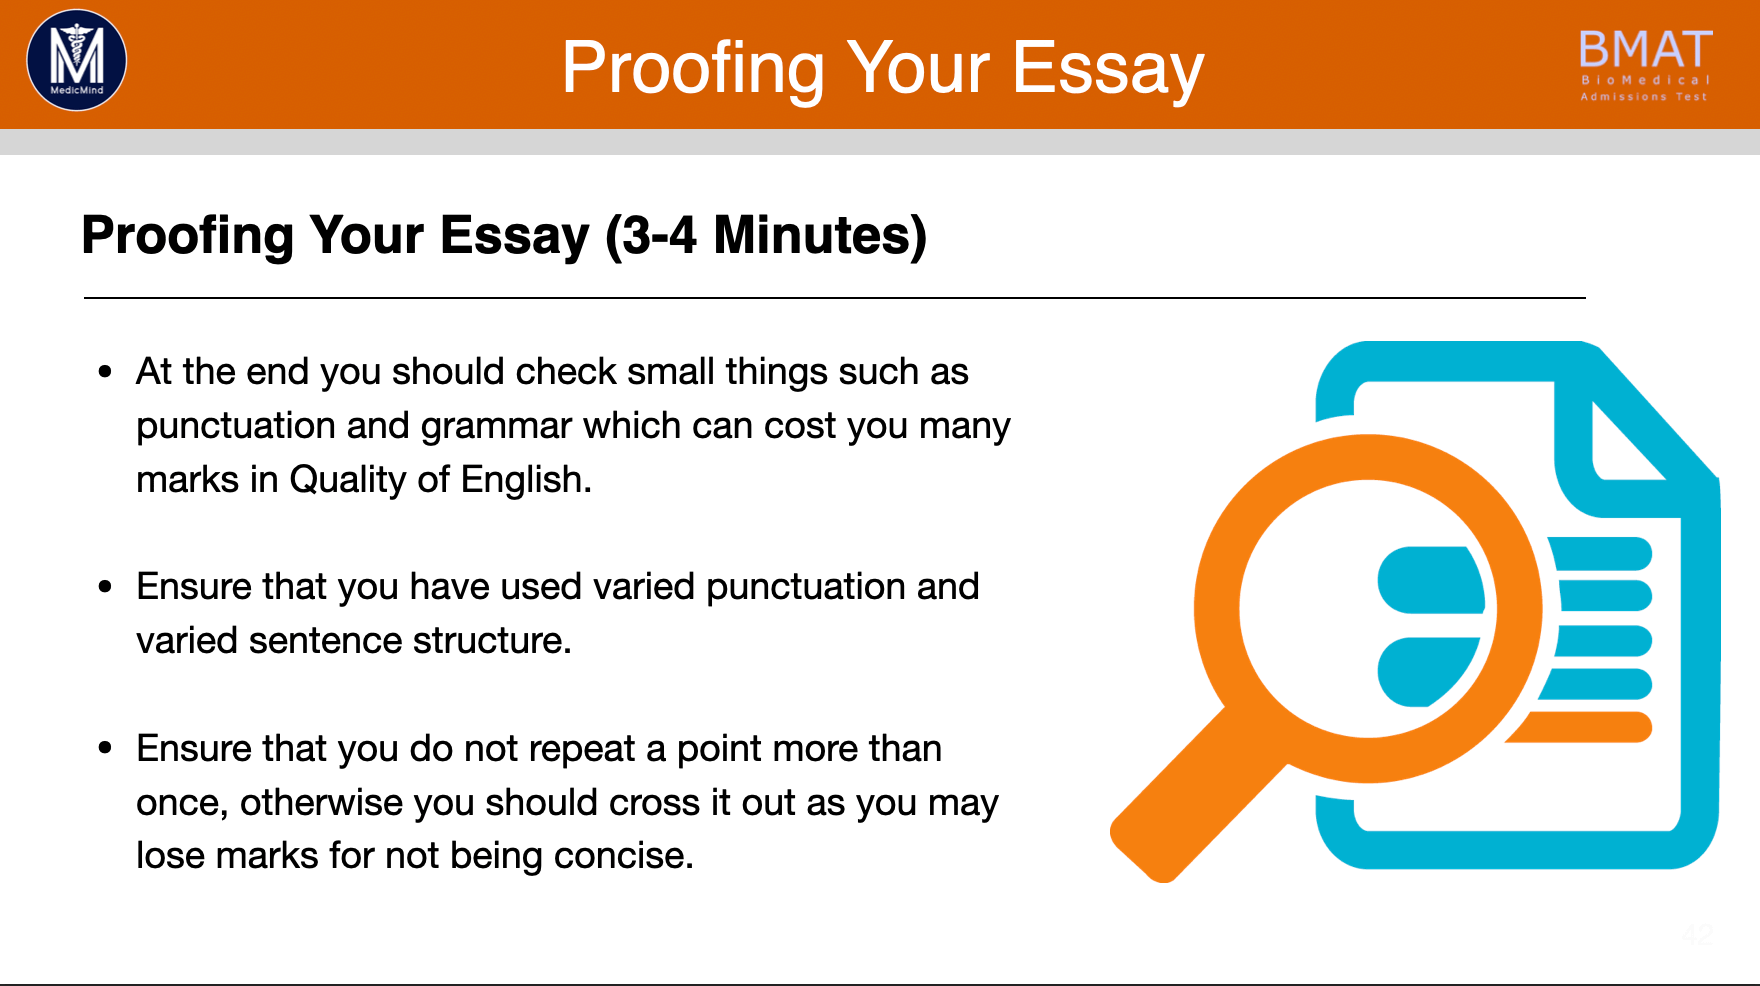 Proofing Your Essay